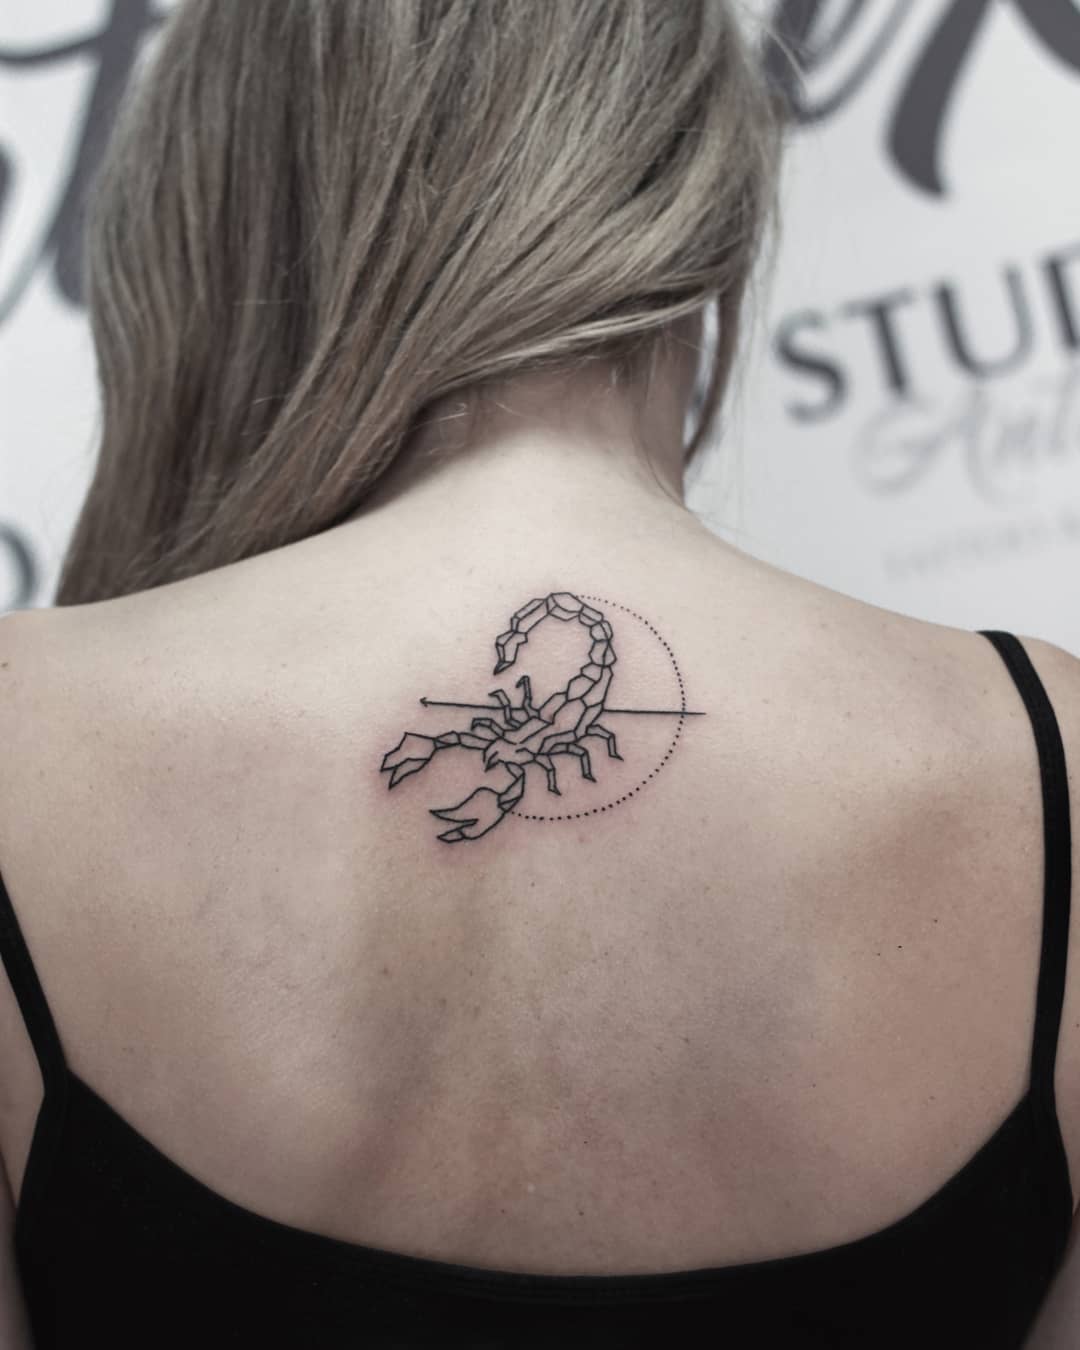 25 stinging scorpio tattoos that are heavy on mystery and mood